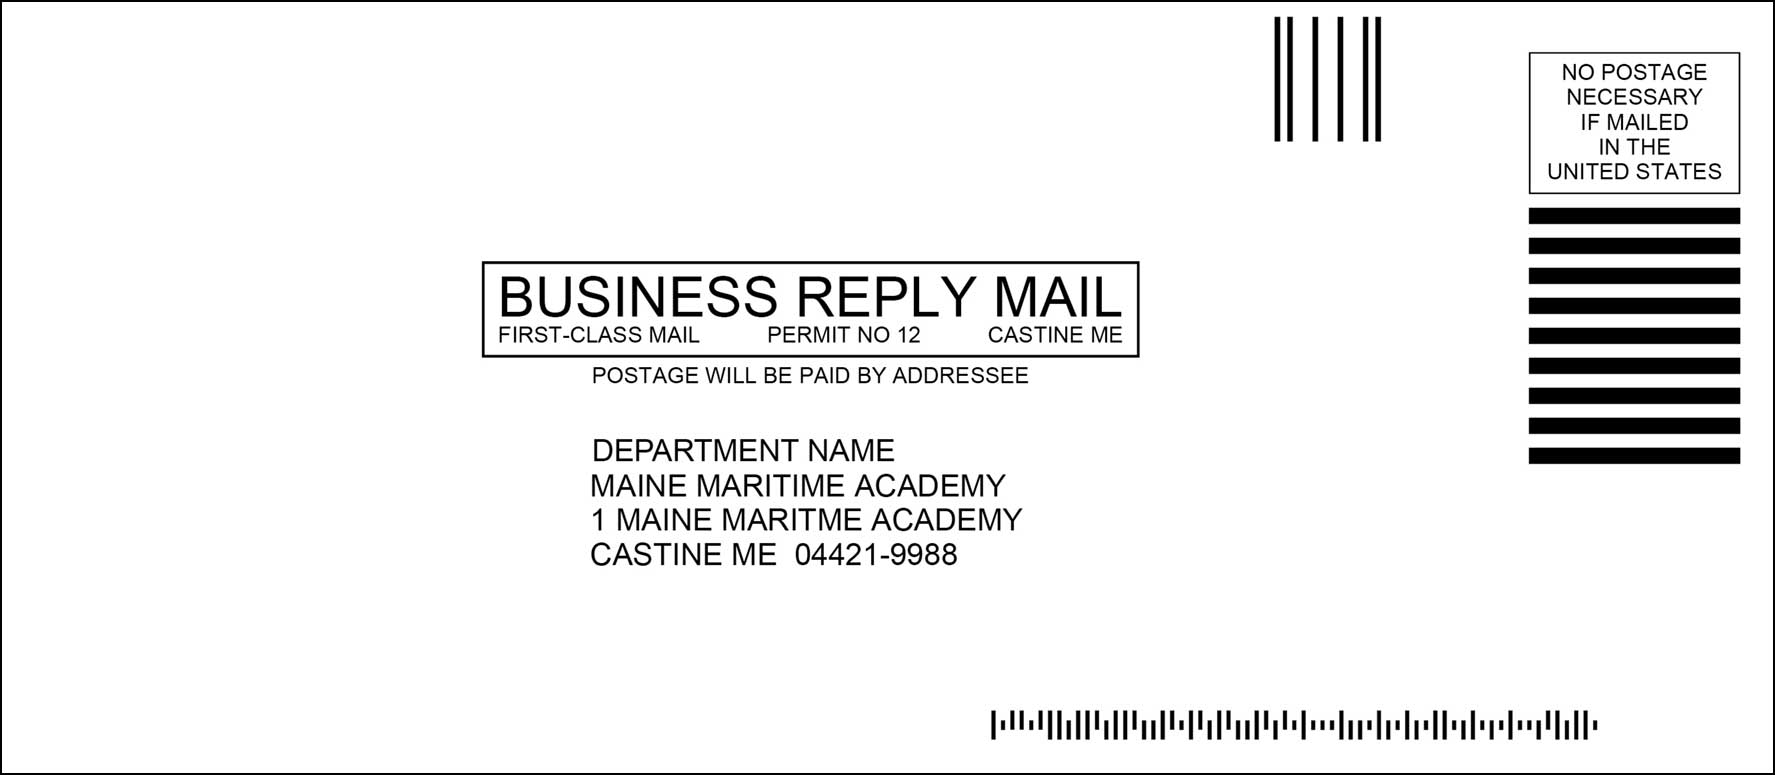 Business Reply Envelope Artwork - BISUNIS Pertaining To Business Reply Mail Template